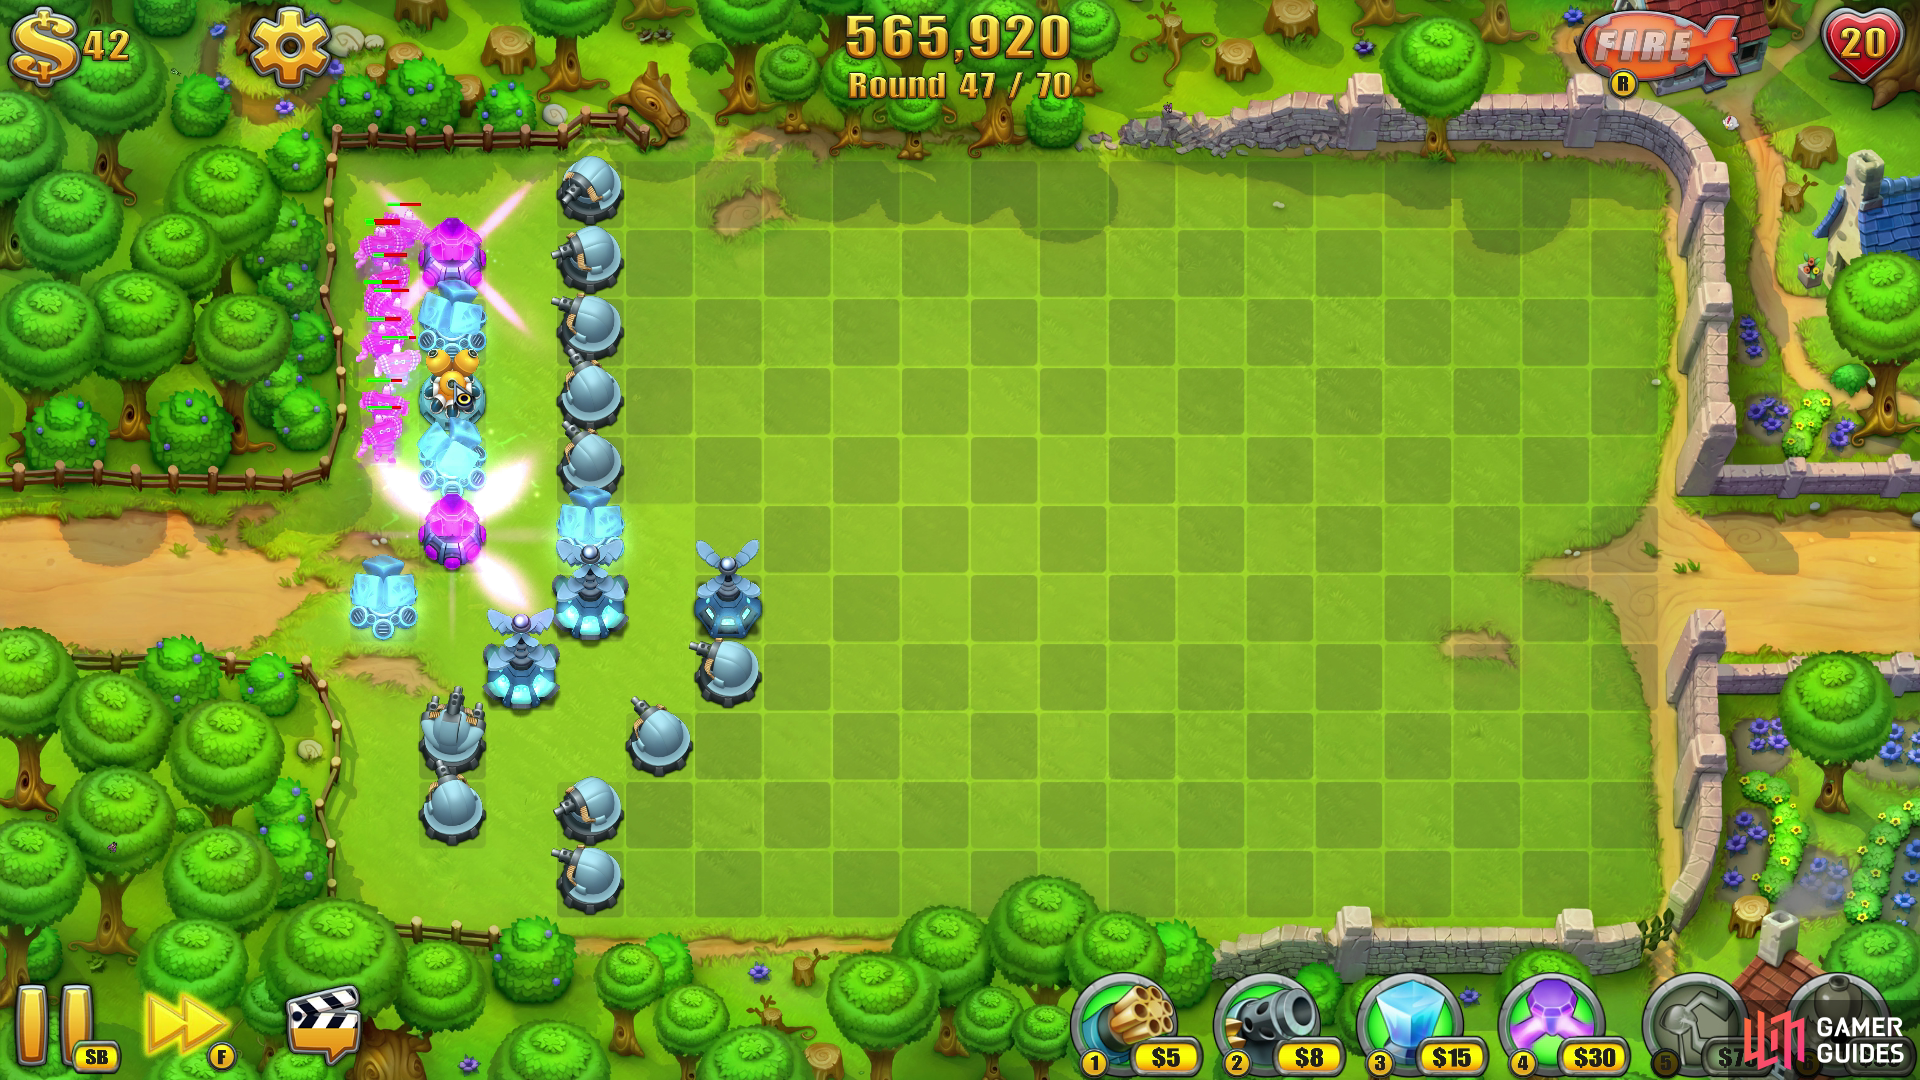 Funneling enemies down a narrow path of towers will cause maximum damage if you line up your towers correctly.